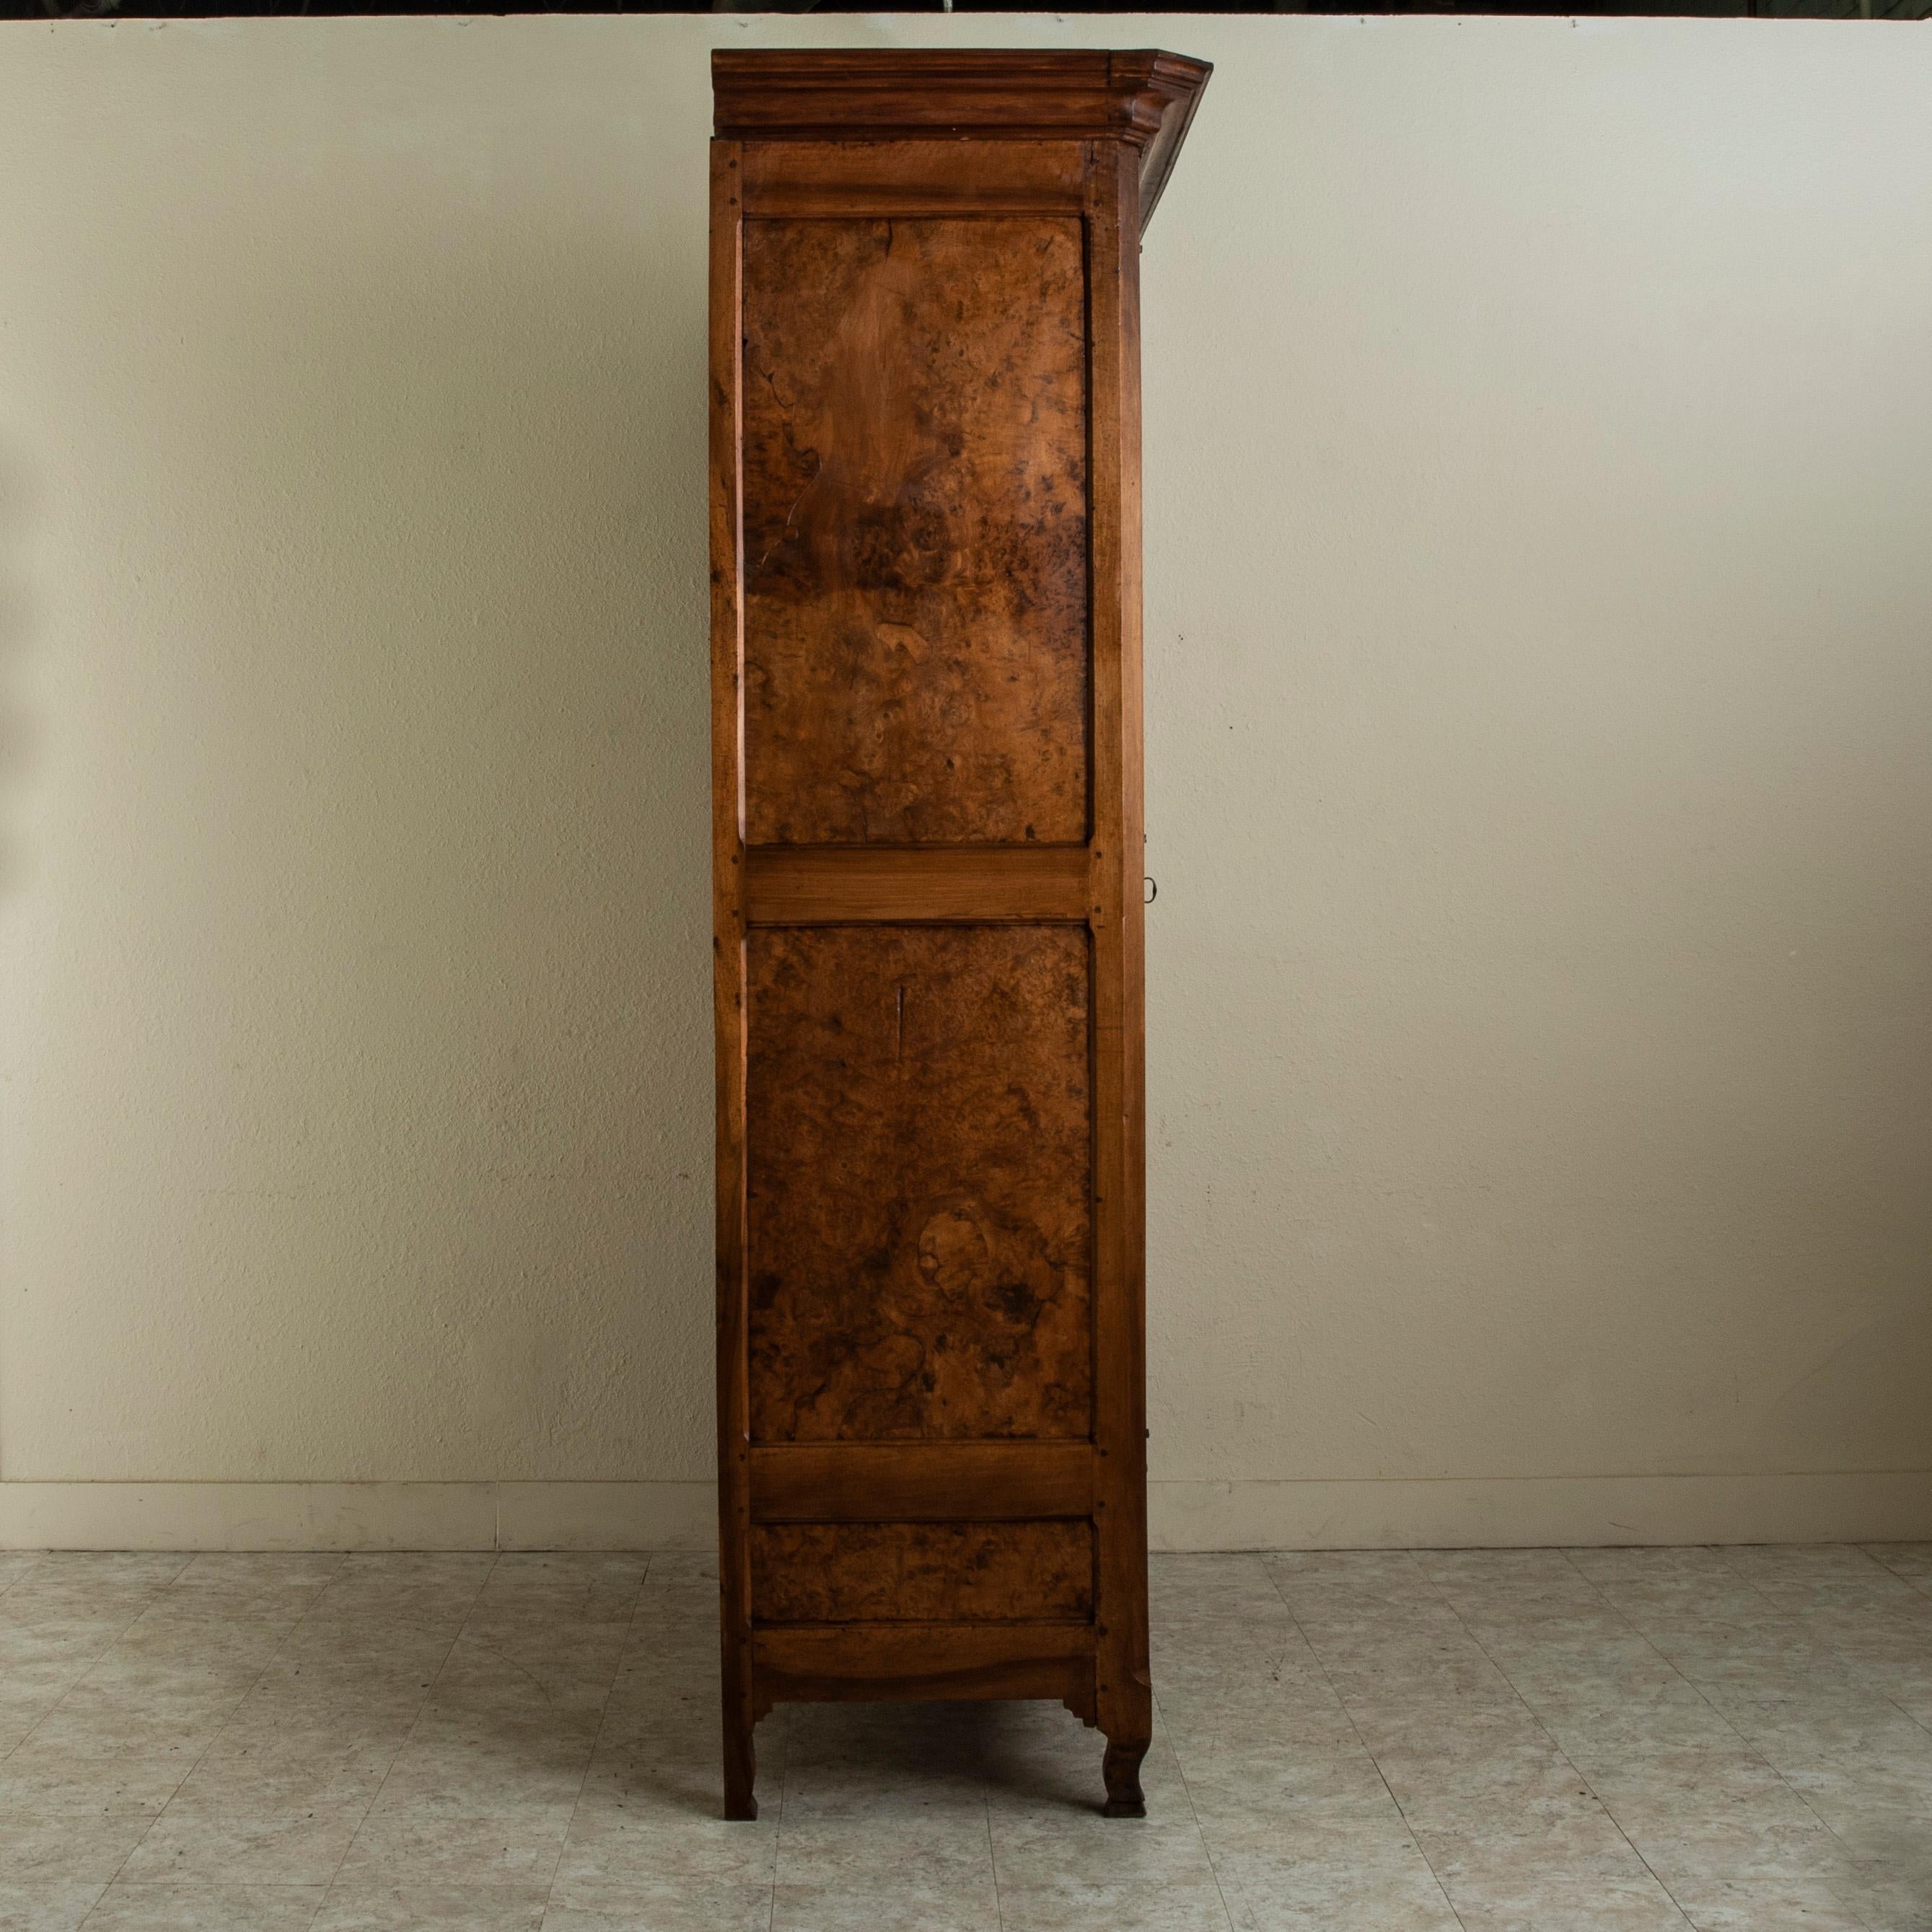 Iron Large Early 19th Century French Burl Elm Armoire or Wardrobe, Hand Forged Locks